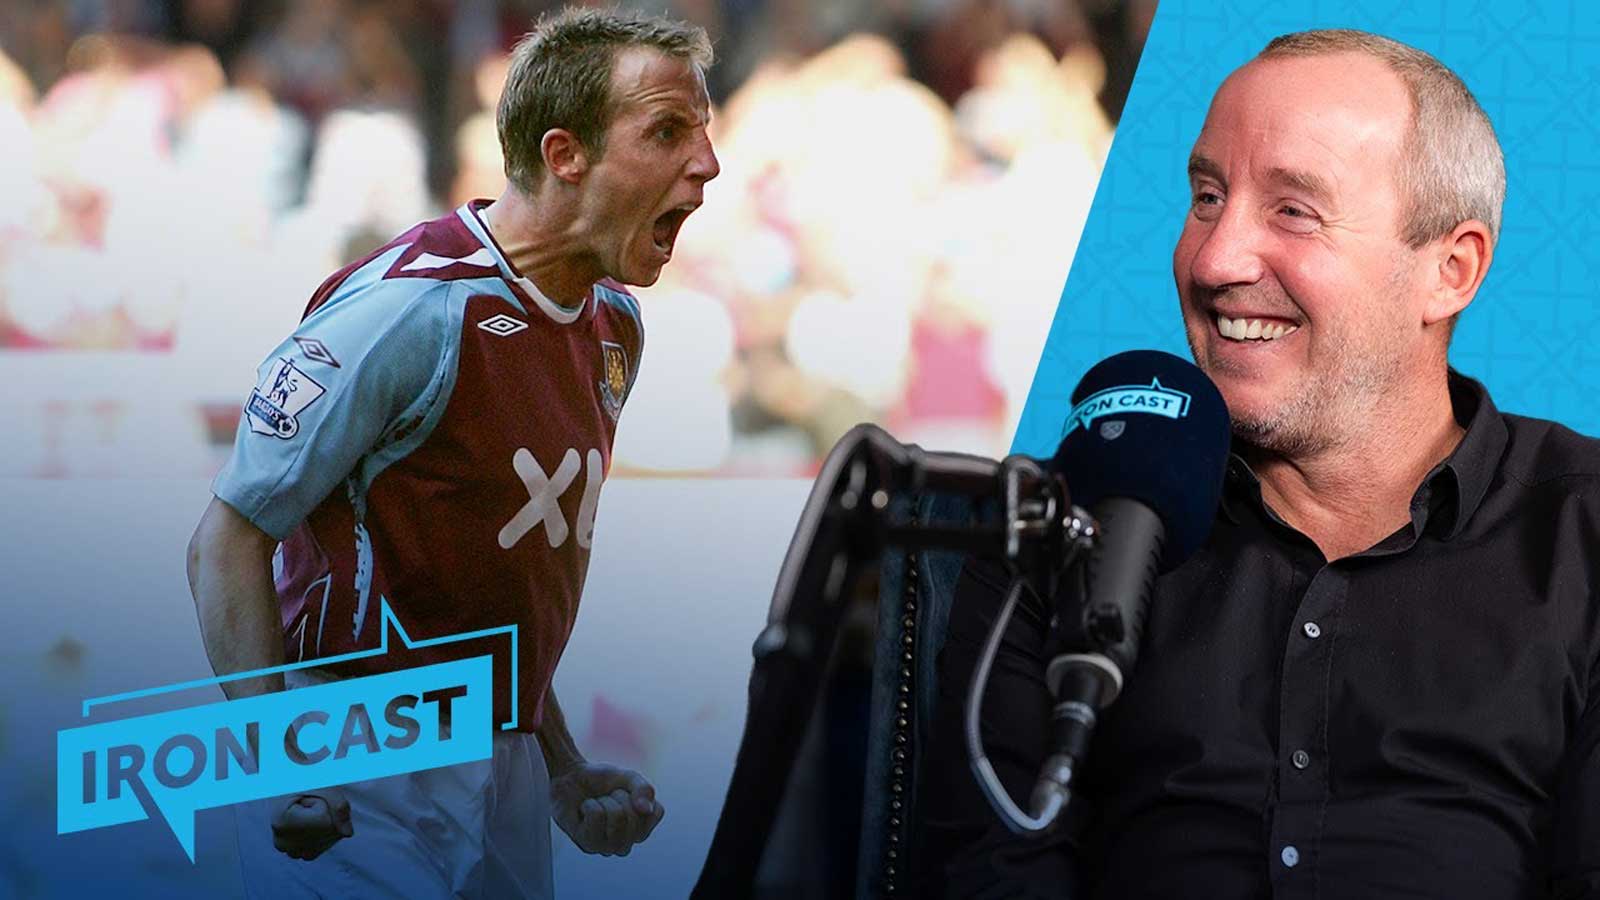 Lee Bowyer on Ironcast